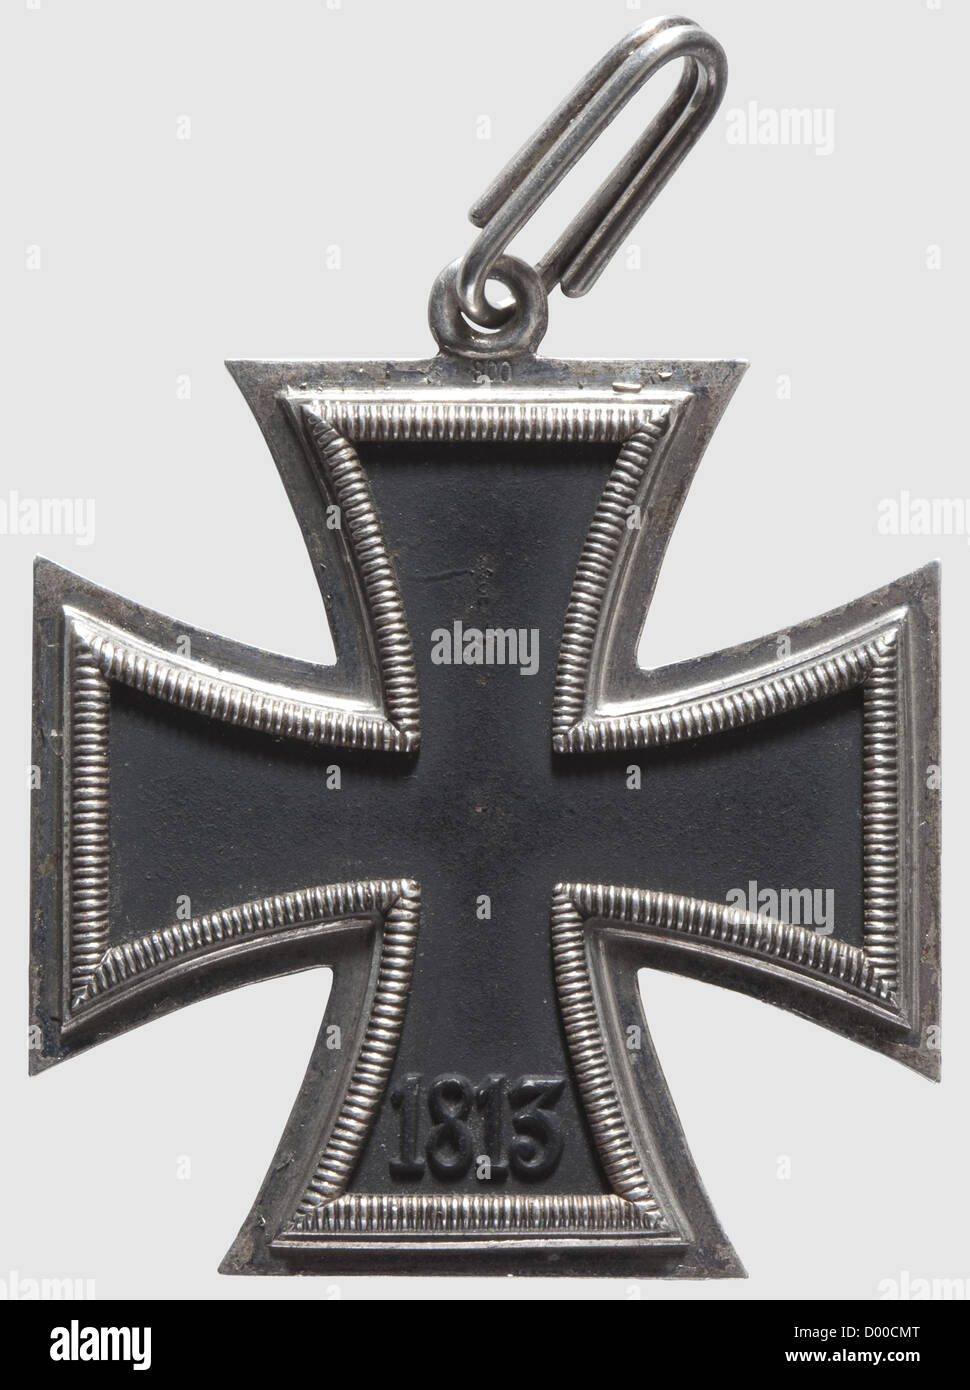 A Knight's Cross to the Iron Cross of 1939,Maker Klein & Quenzer,Idar-Oberstein. The silver frame stamped '800',the silver suspension ring '800' and '65'. Blackened iron core. Dimensions 49.1 x 48.6 mm,weight 31.92 g(Nie 7.03.08 c). Included is a 72 cm length of non-customised neck ribbon(stained),historic,historical,1930s,20th century,awards,award,German Reich,Third Reich,Nazi era,National Socialism,object,objects,stills,medal,decoration,medals,decorations,clipping,cut out,cut-out,cut-outs,honor,honour,National Socialist,Nazi,Na,Additional-Rights-Clearences-Not Available Stock Photo